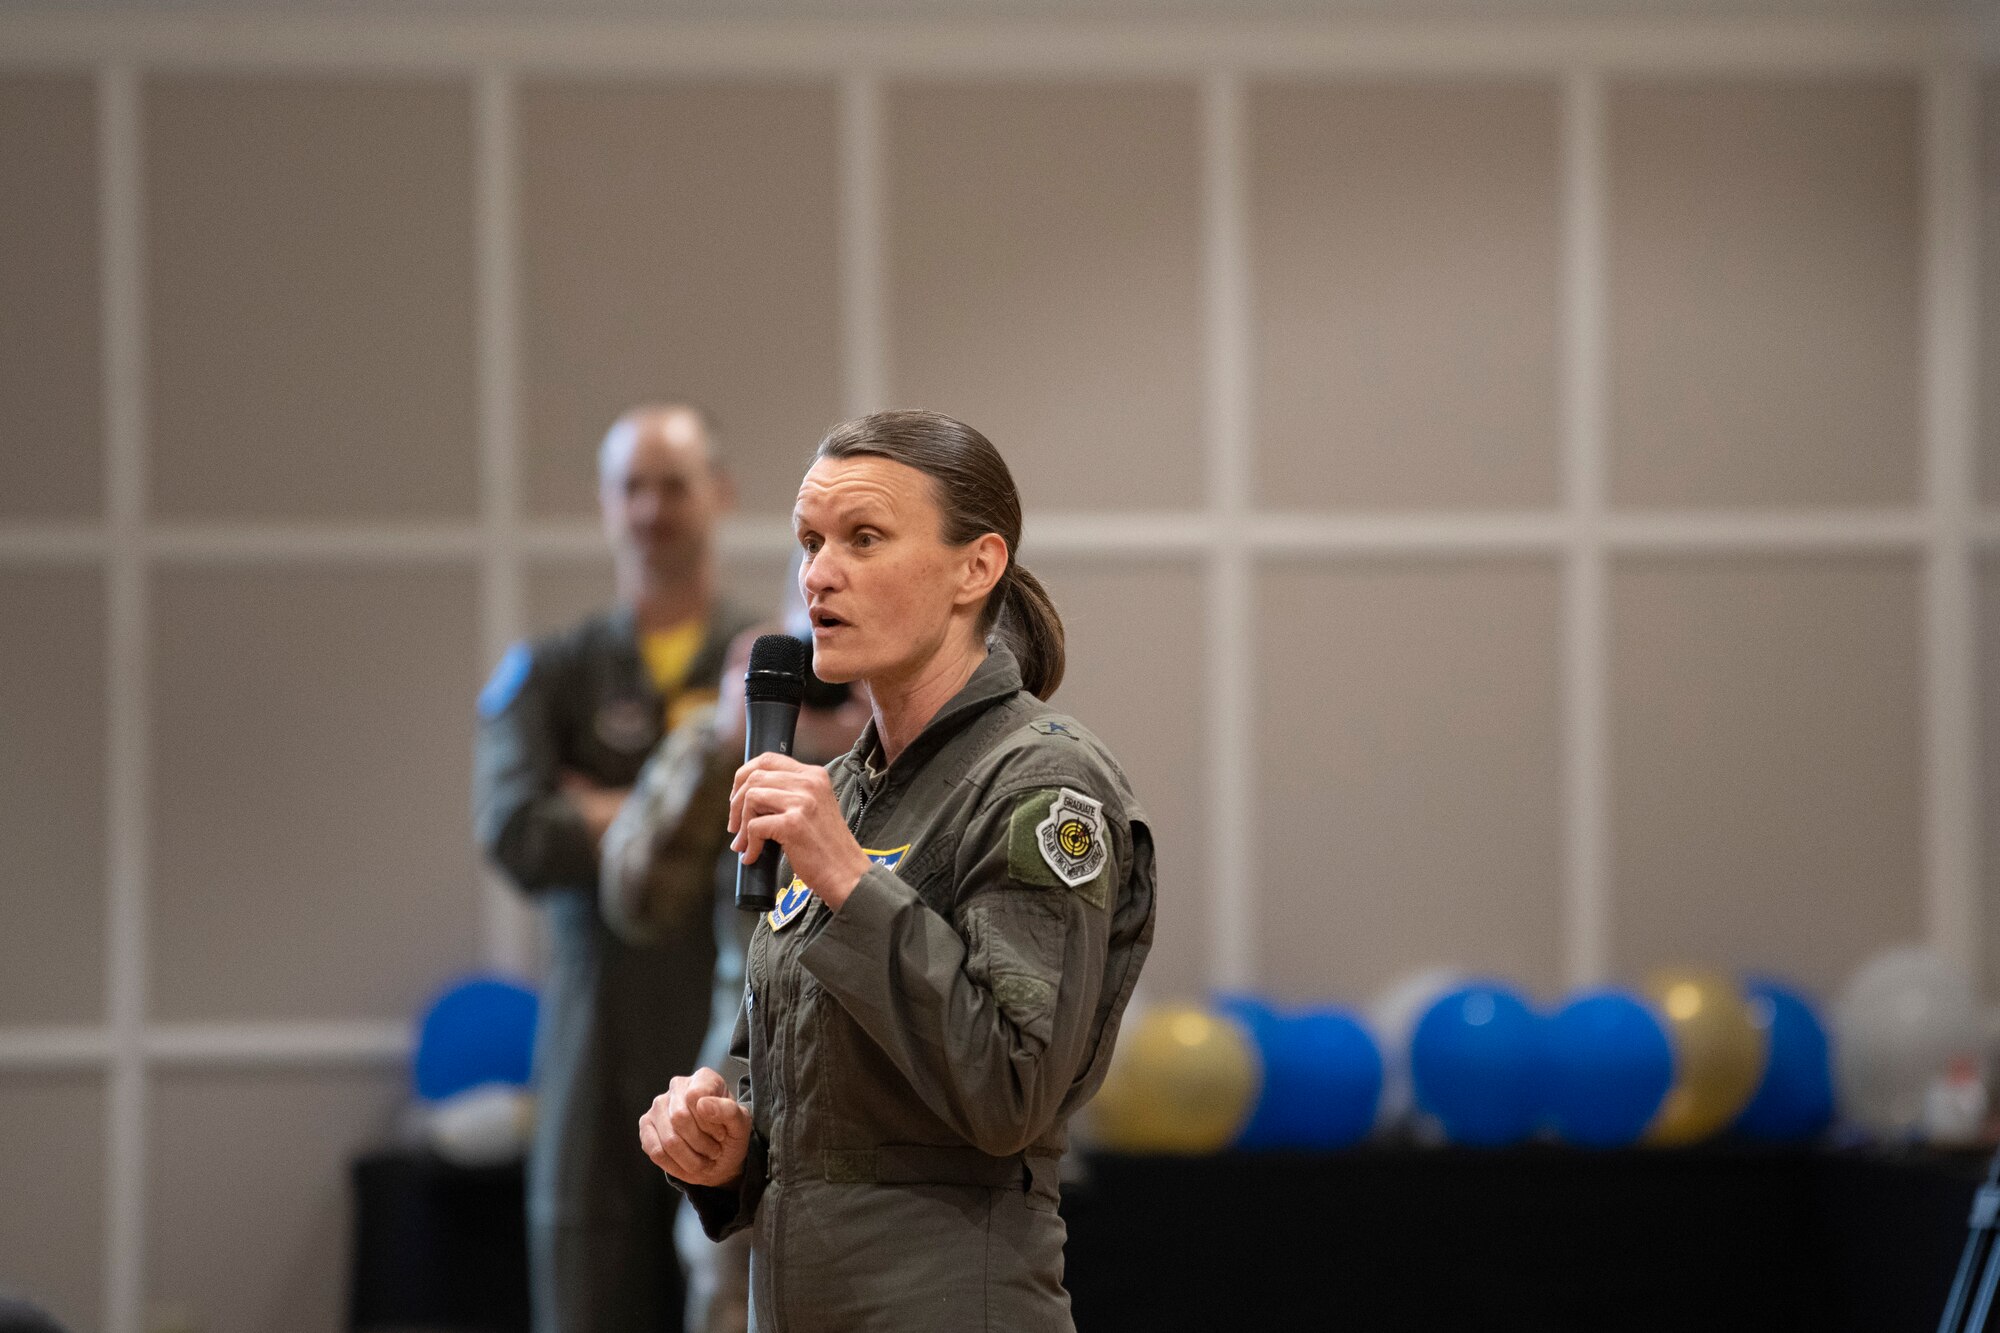 U.S. Air Force Brig. Gen. Leslie Maher, Jeanne M. Holm Center for Officer Accessions and Citizen Development commander, speaks during the Undergraduate Combat Systems Officer Training (UCT) Sapphire Event March 11, 2022, at Naval Air Station Pensacola, Florida.